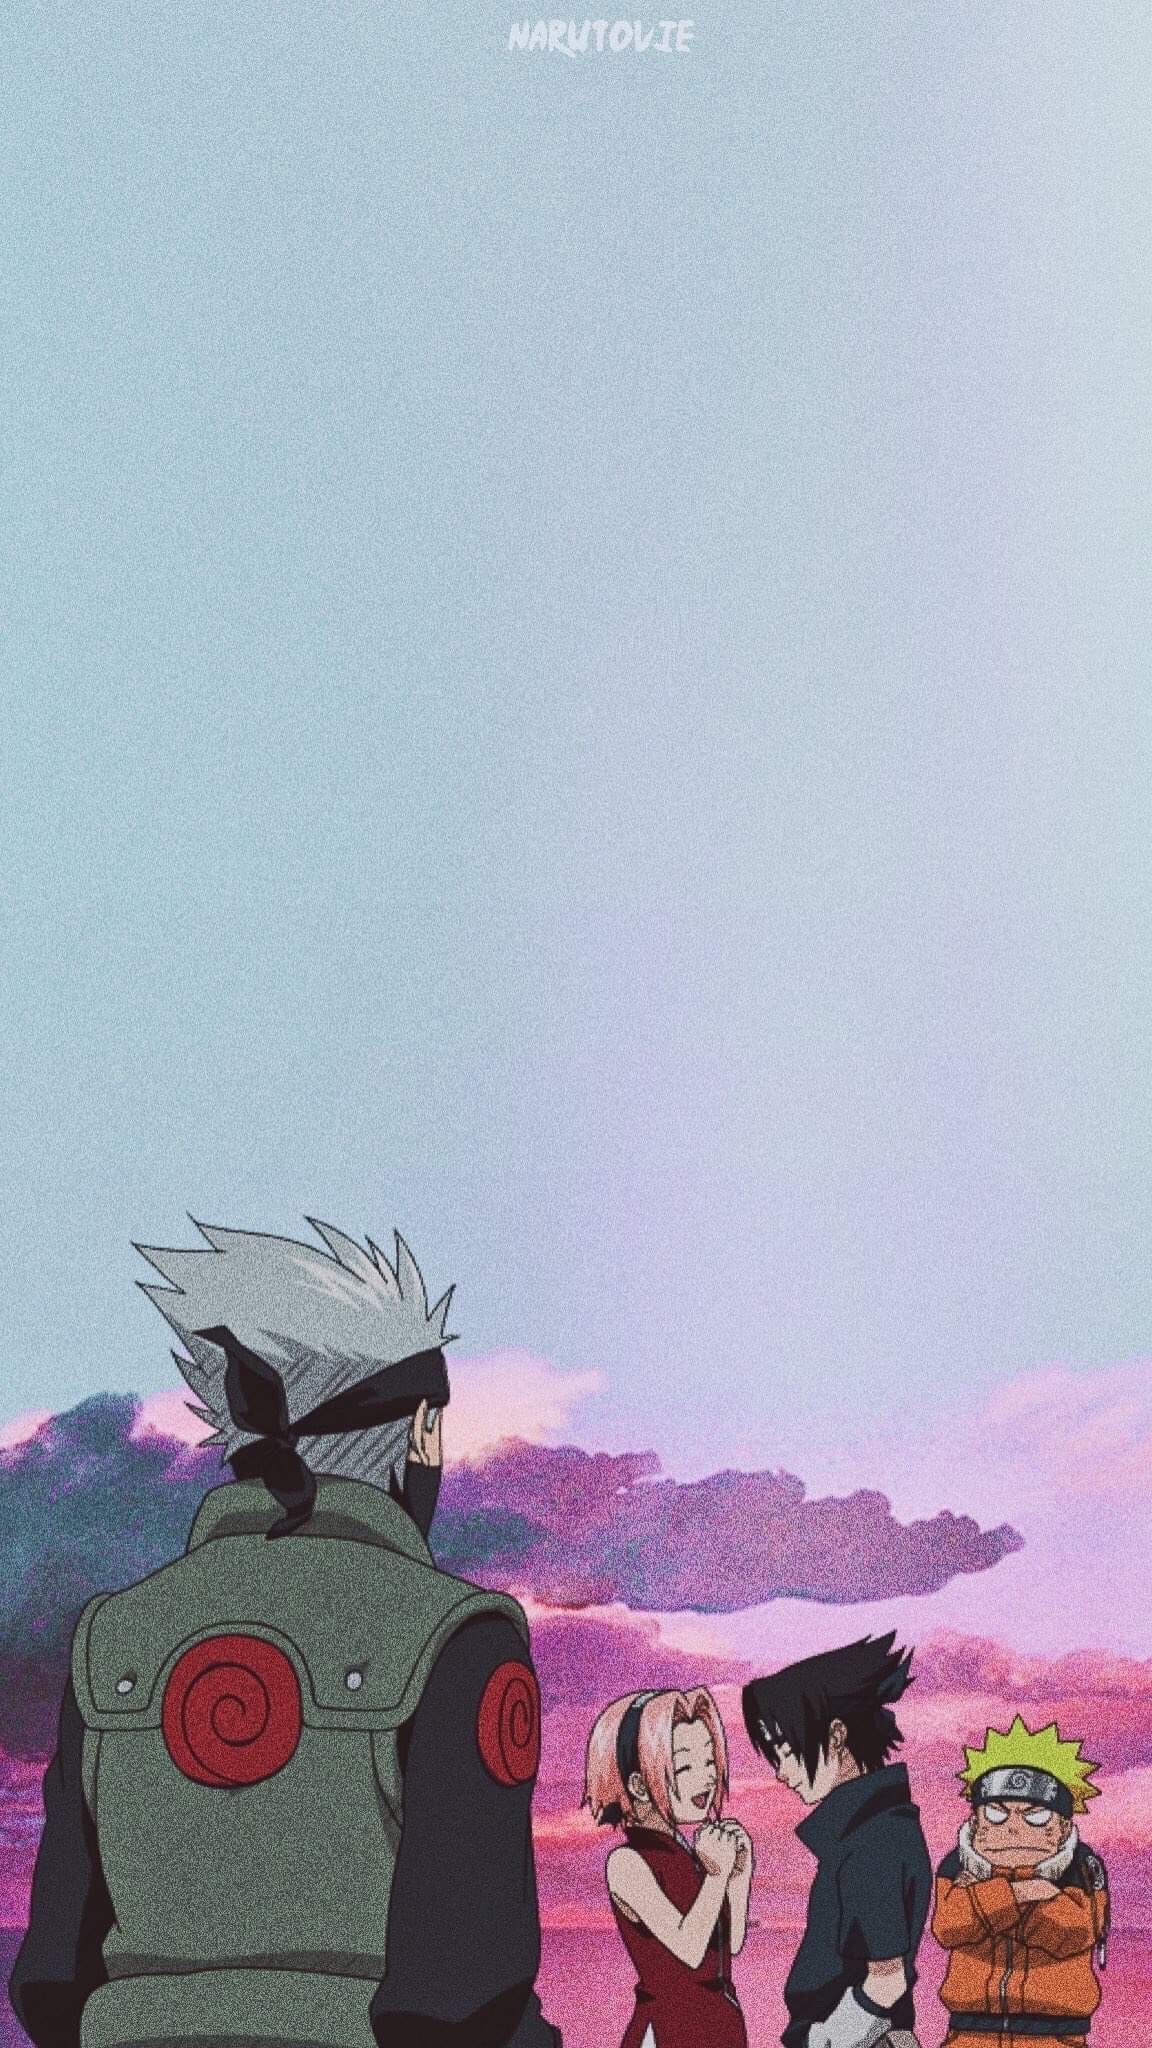 1080x1920 naruto anime wallpaper for android phone and desktop backgrounds - Naruto